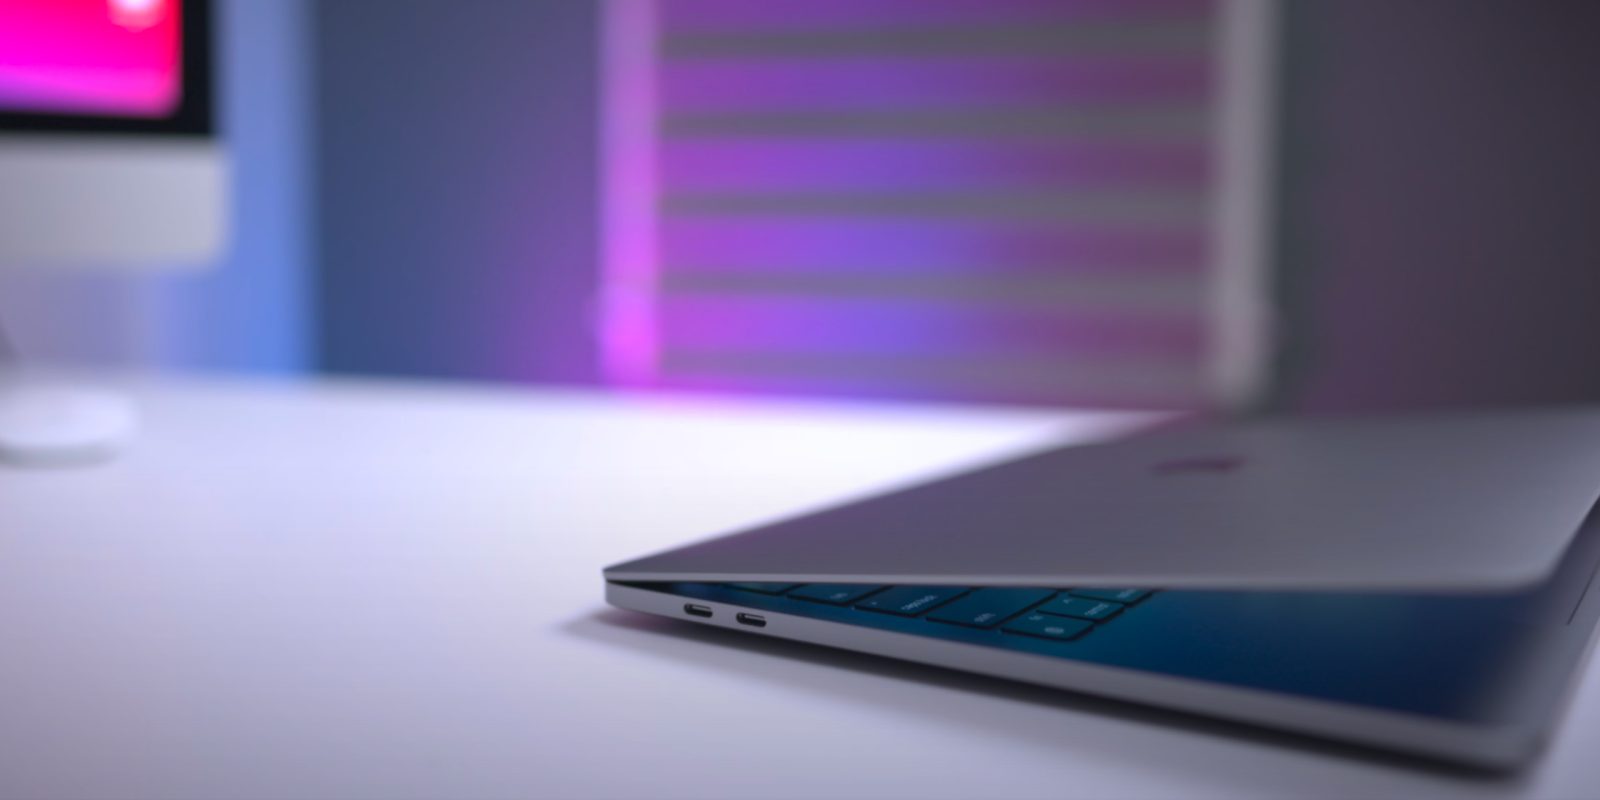 Kuo details 26 MacBook Pro: new design with squared-off sides